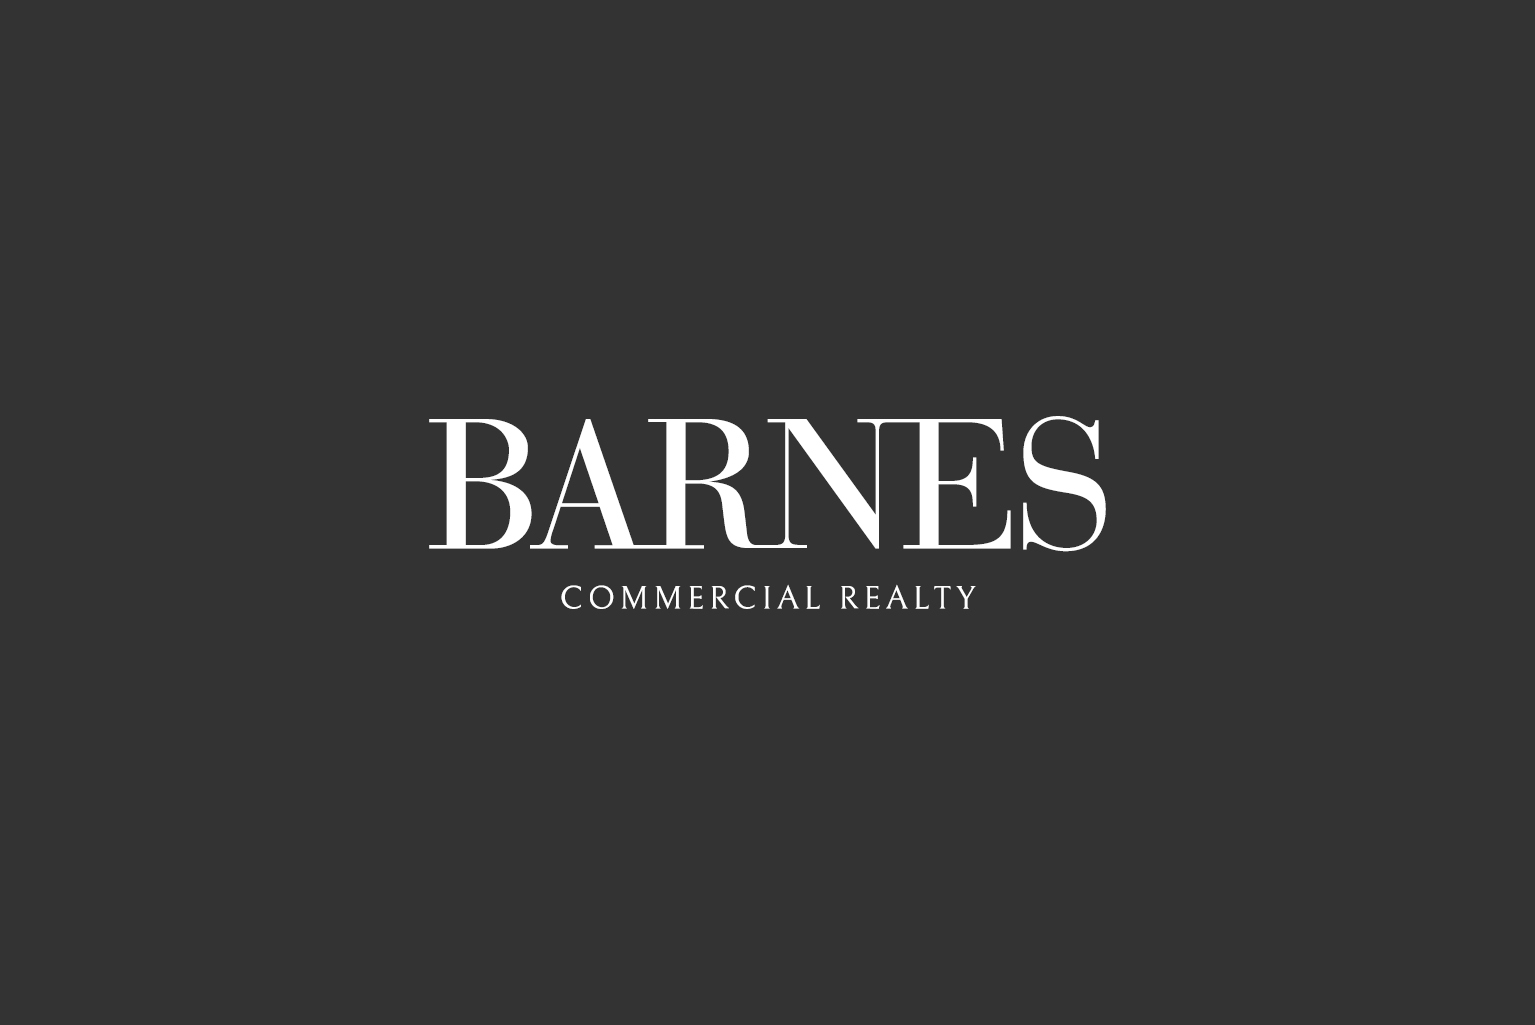 BARNES Commercial Realty